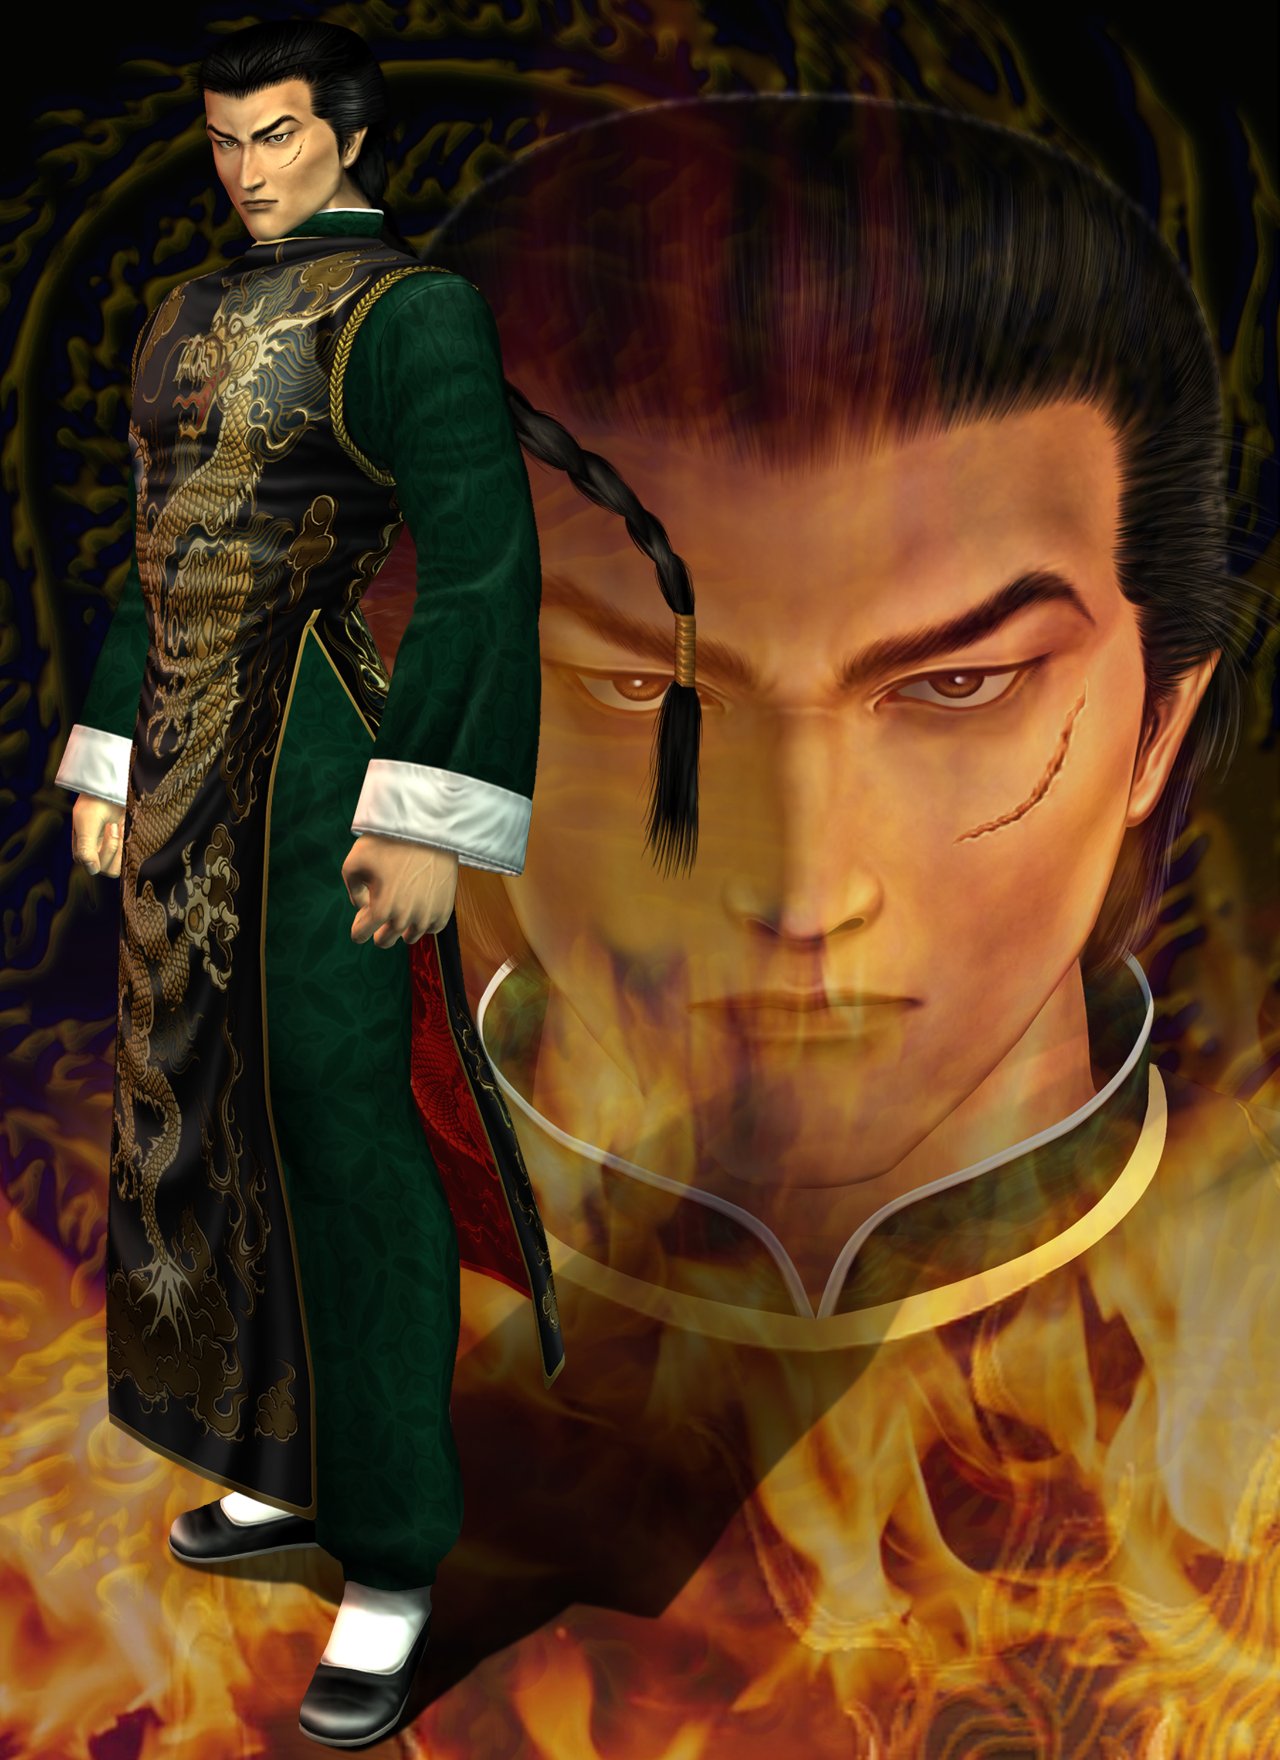 Wallpaper From The Game Shenmue For Sega Dreamcast